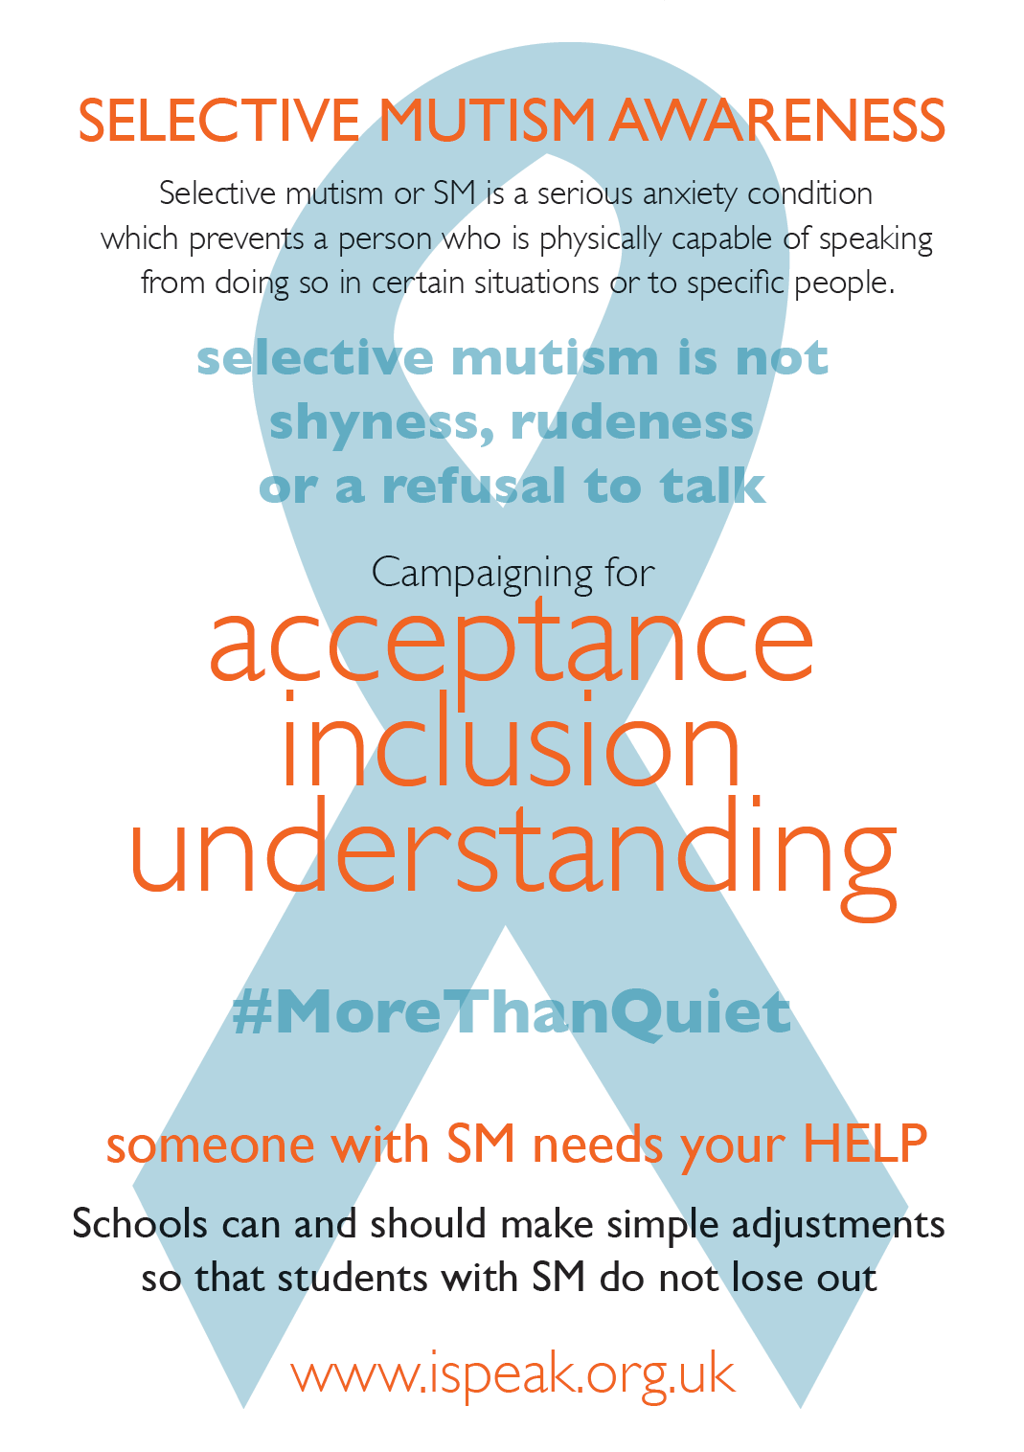 Selective Mutism Awareness,Selective Mutism is not shyness, rudeness or a refusal to speak